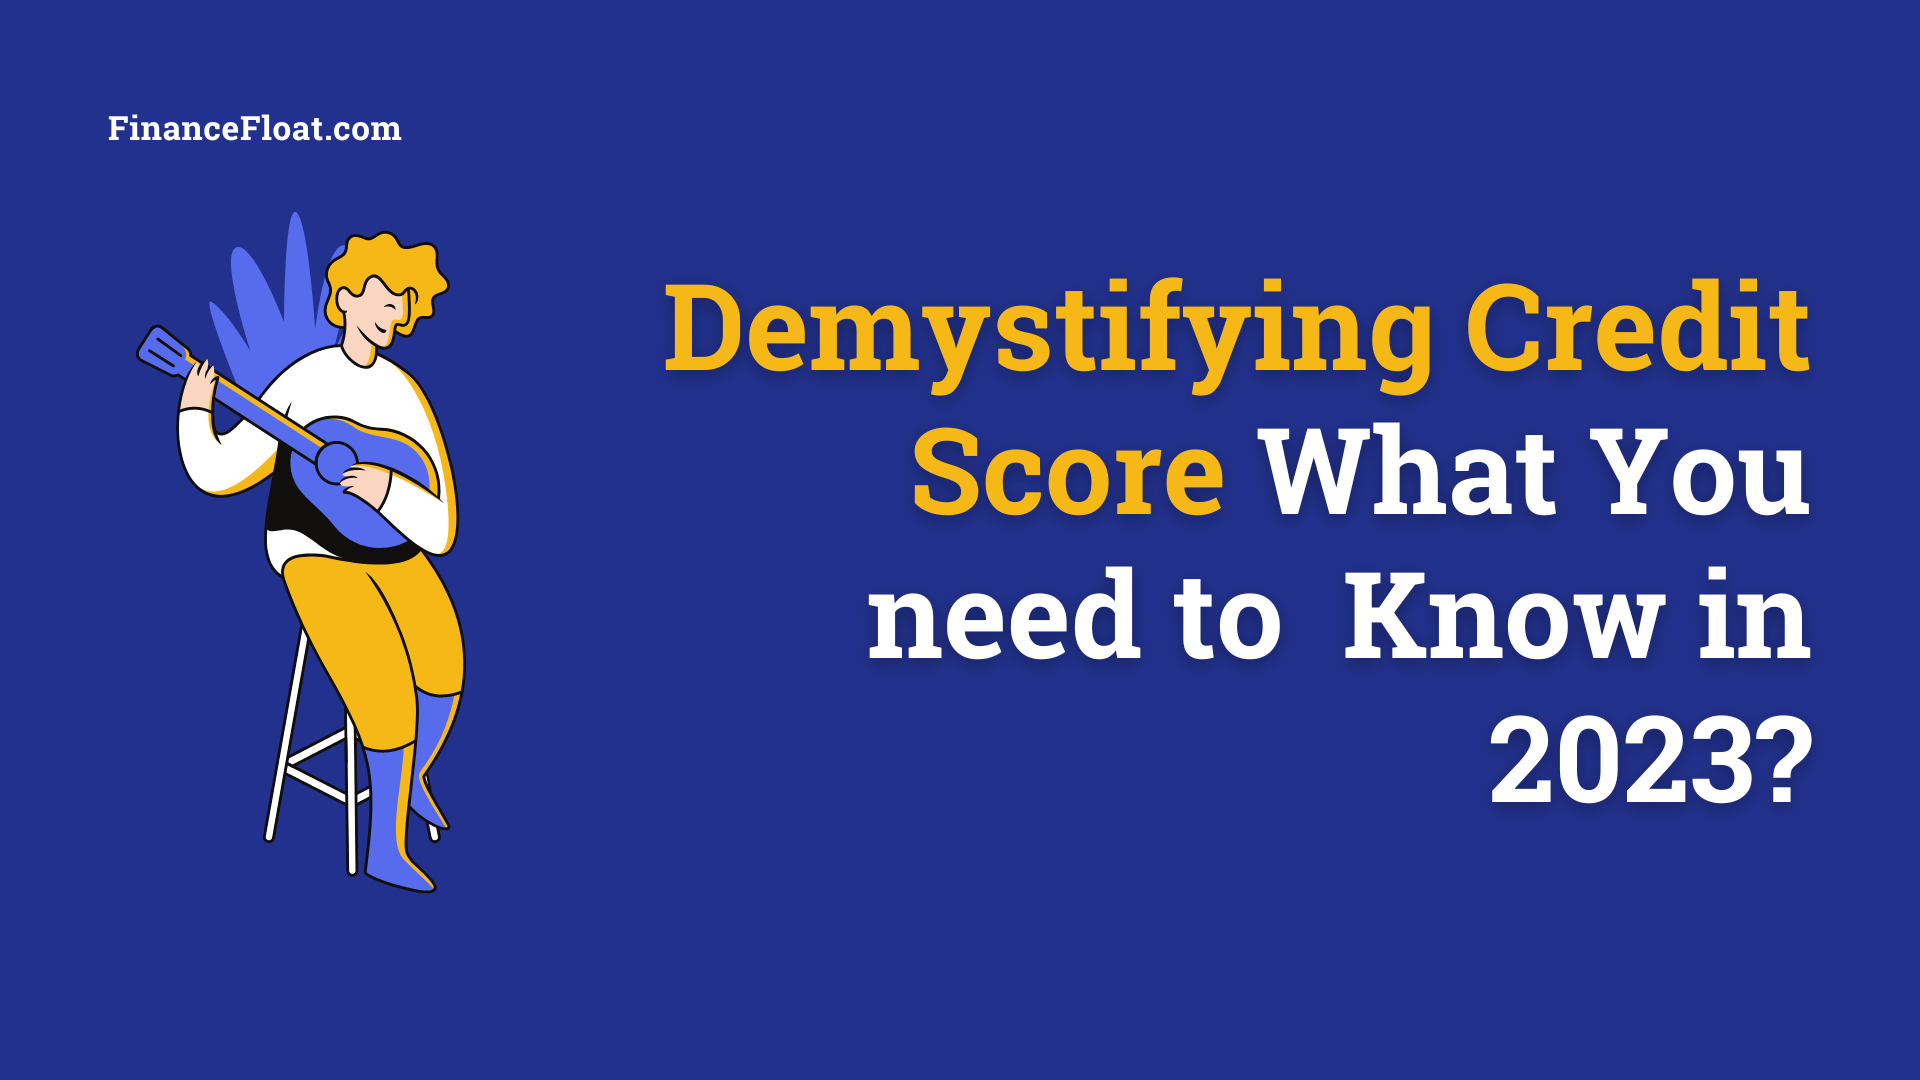 Demystifying Credit Score What You need to Know in 2023?